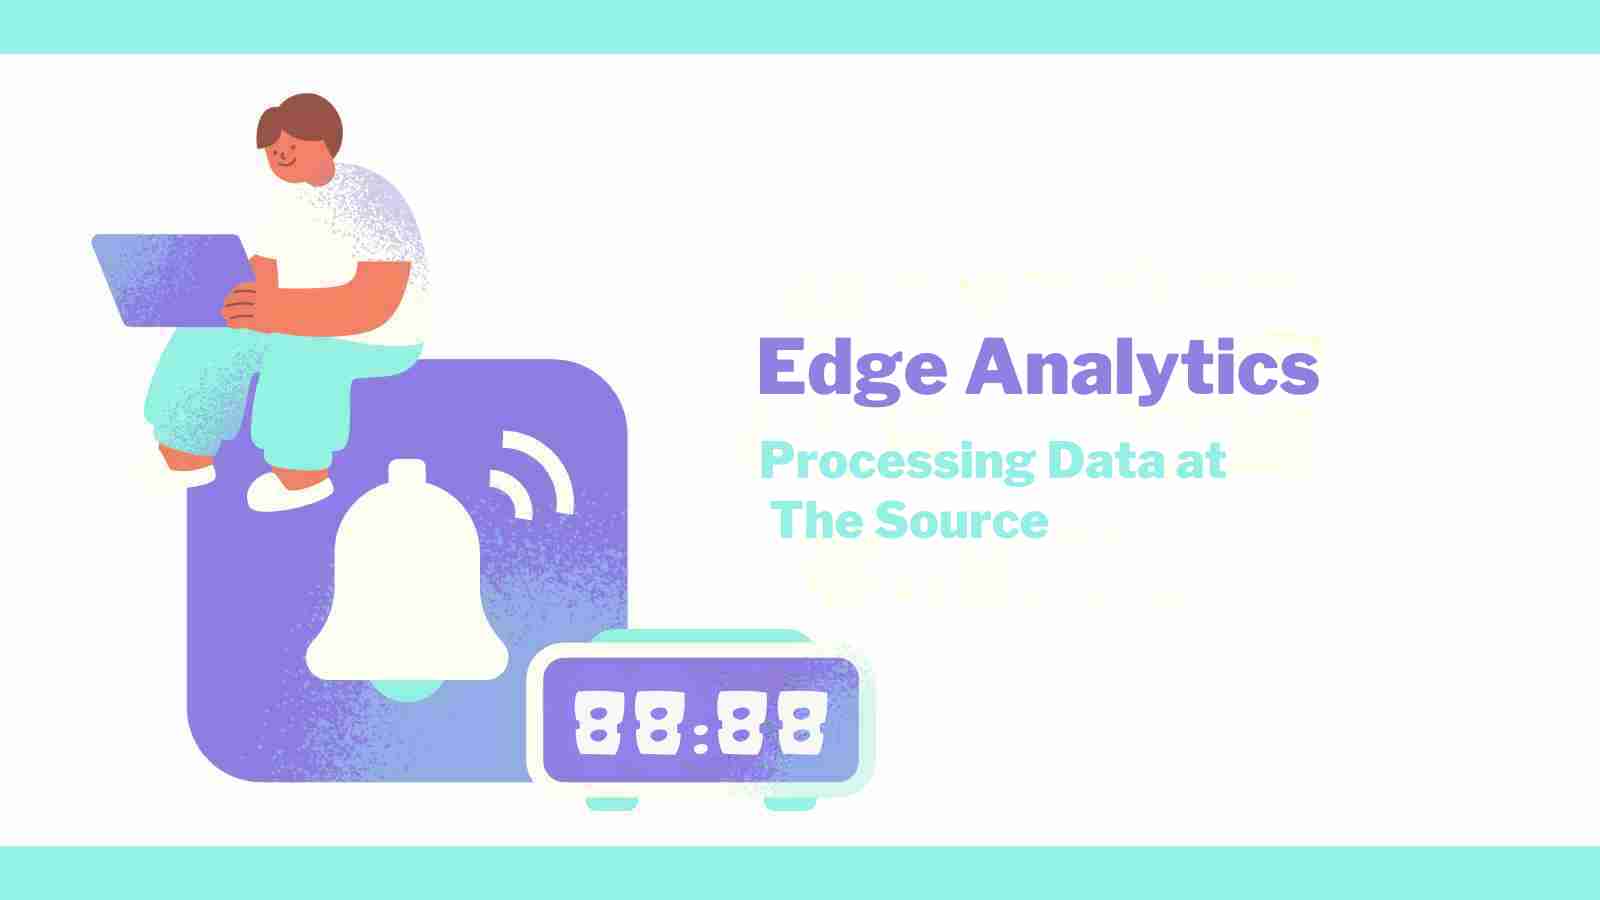 Edge Analytics Processing Data at the Source